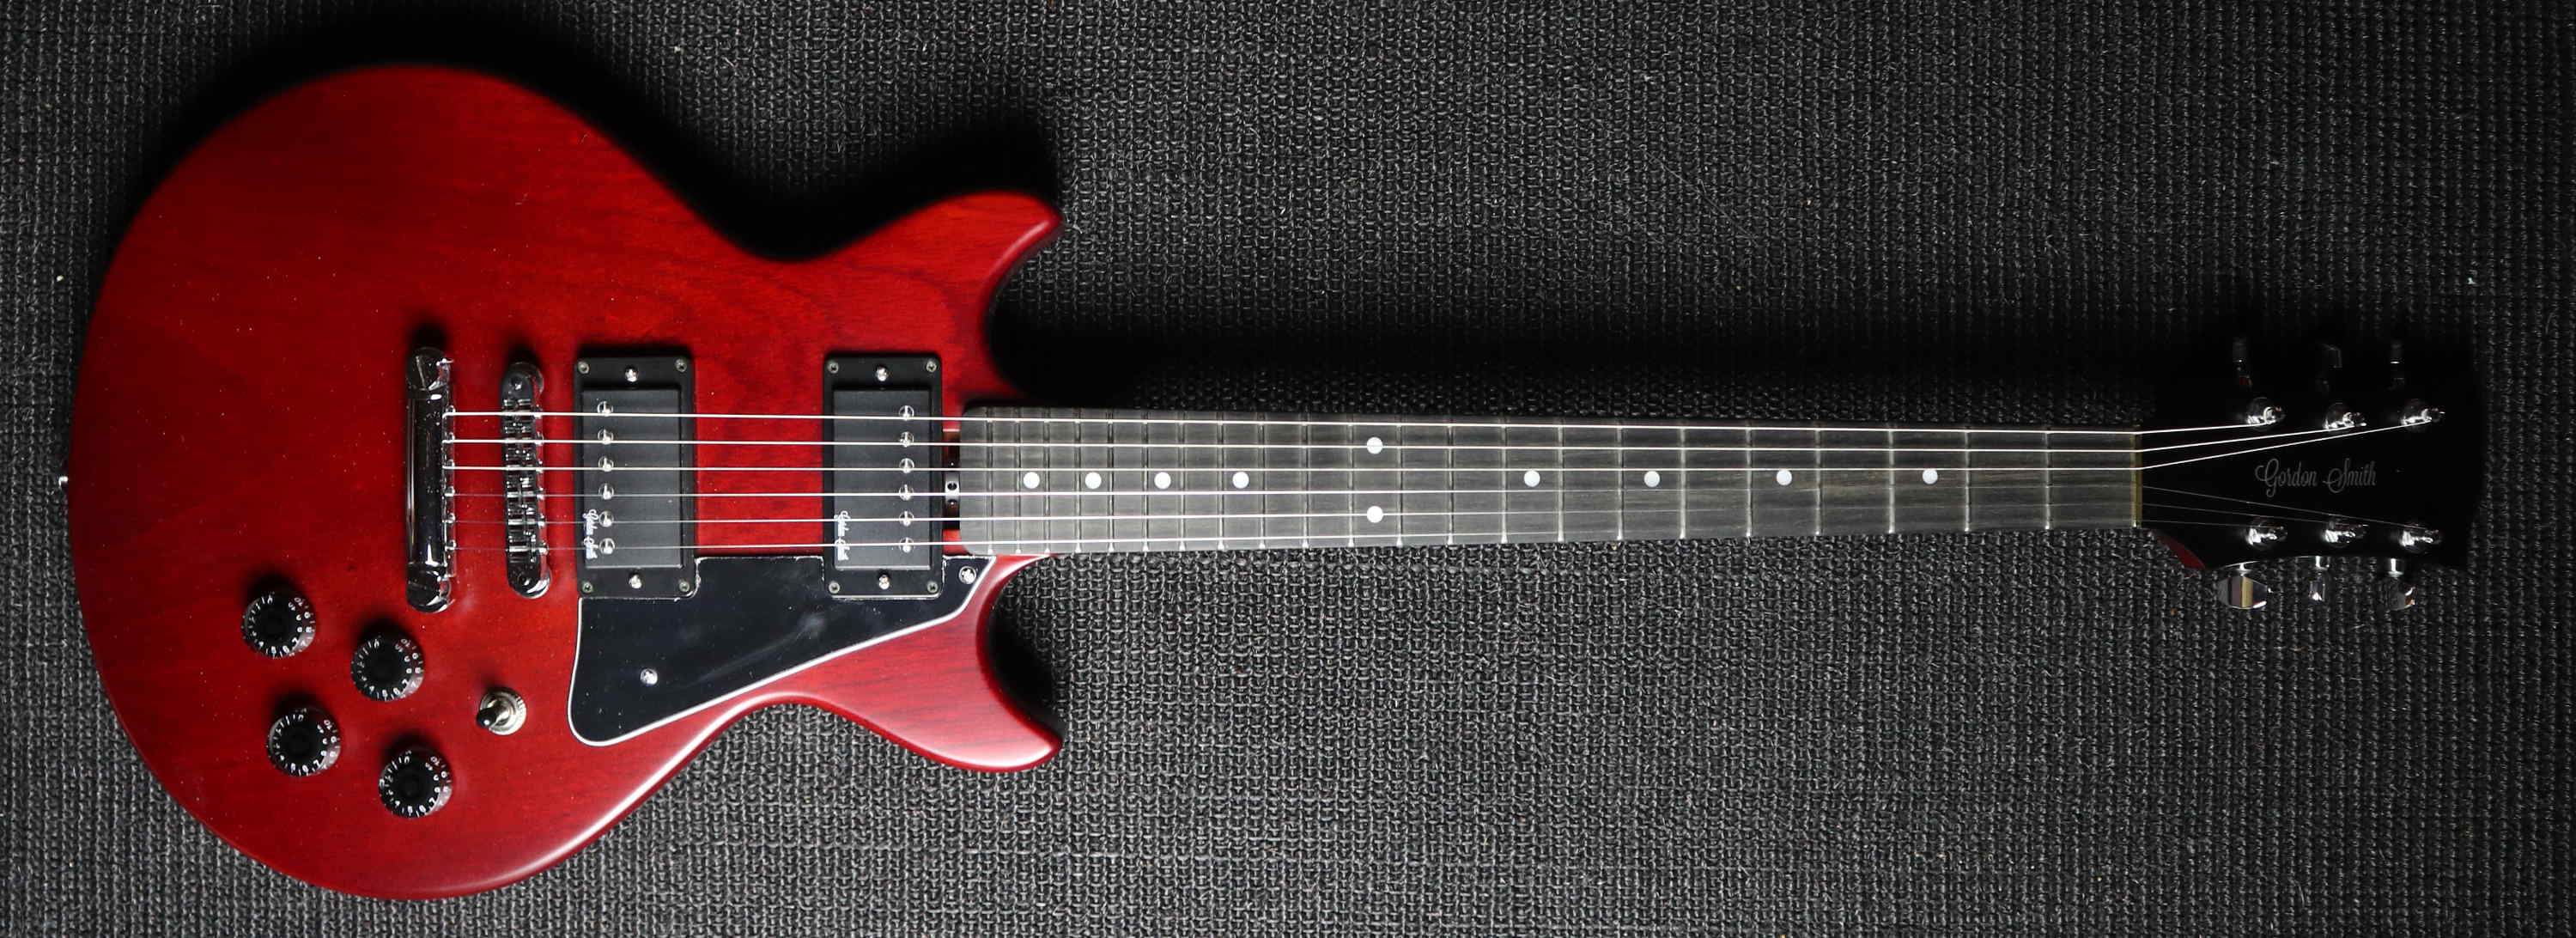 Gordon Smith GS2 Heritage Trans Red SN: 18130, Electric Guitar for sale at Richards Guitars.